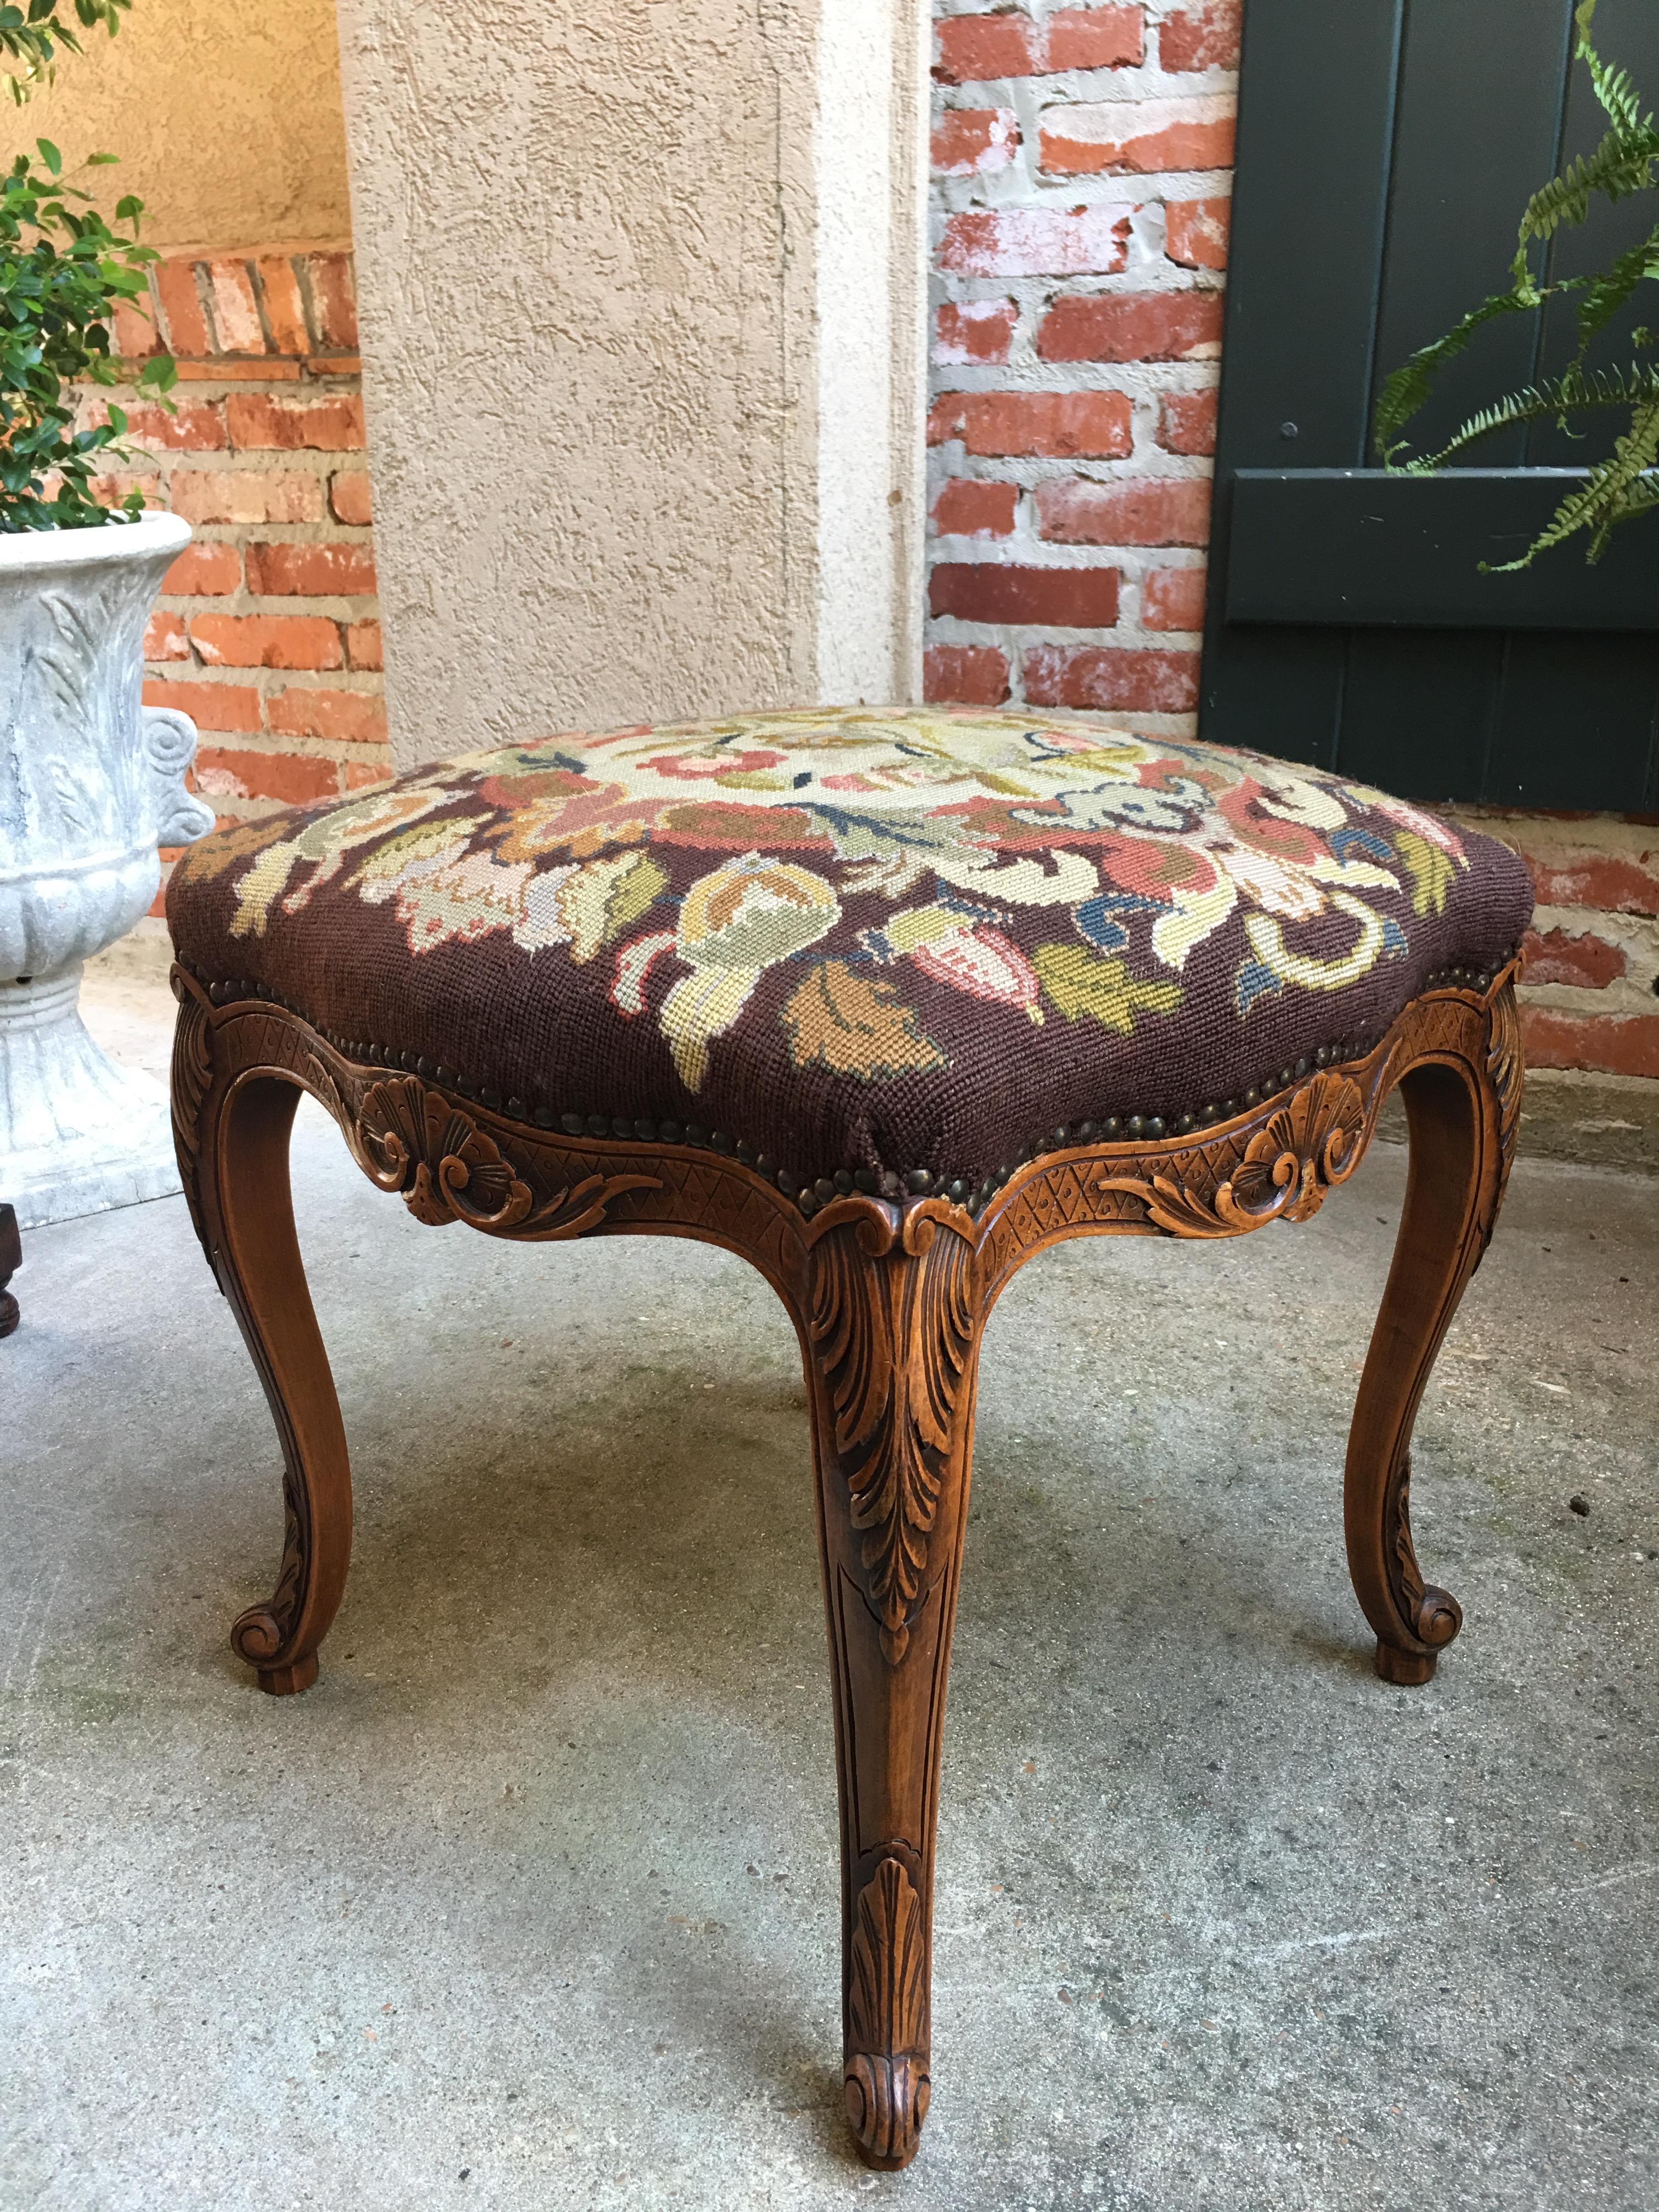 Antique French carved oak Louis XV Stool Bench Tapestry Needlework

~Direct from France~
~One of several great antique stools and benches from our most recent container!~
~Fabulous French Louis XV style with cabriole legs and hand carved apron on